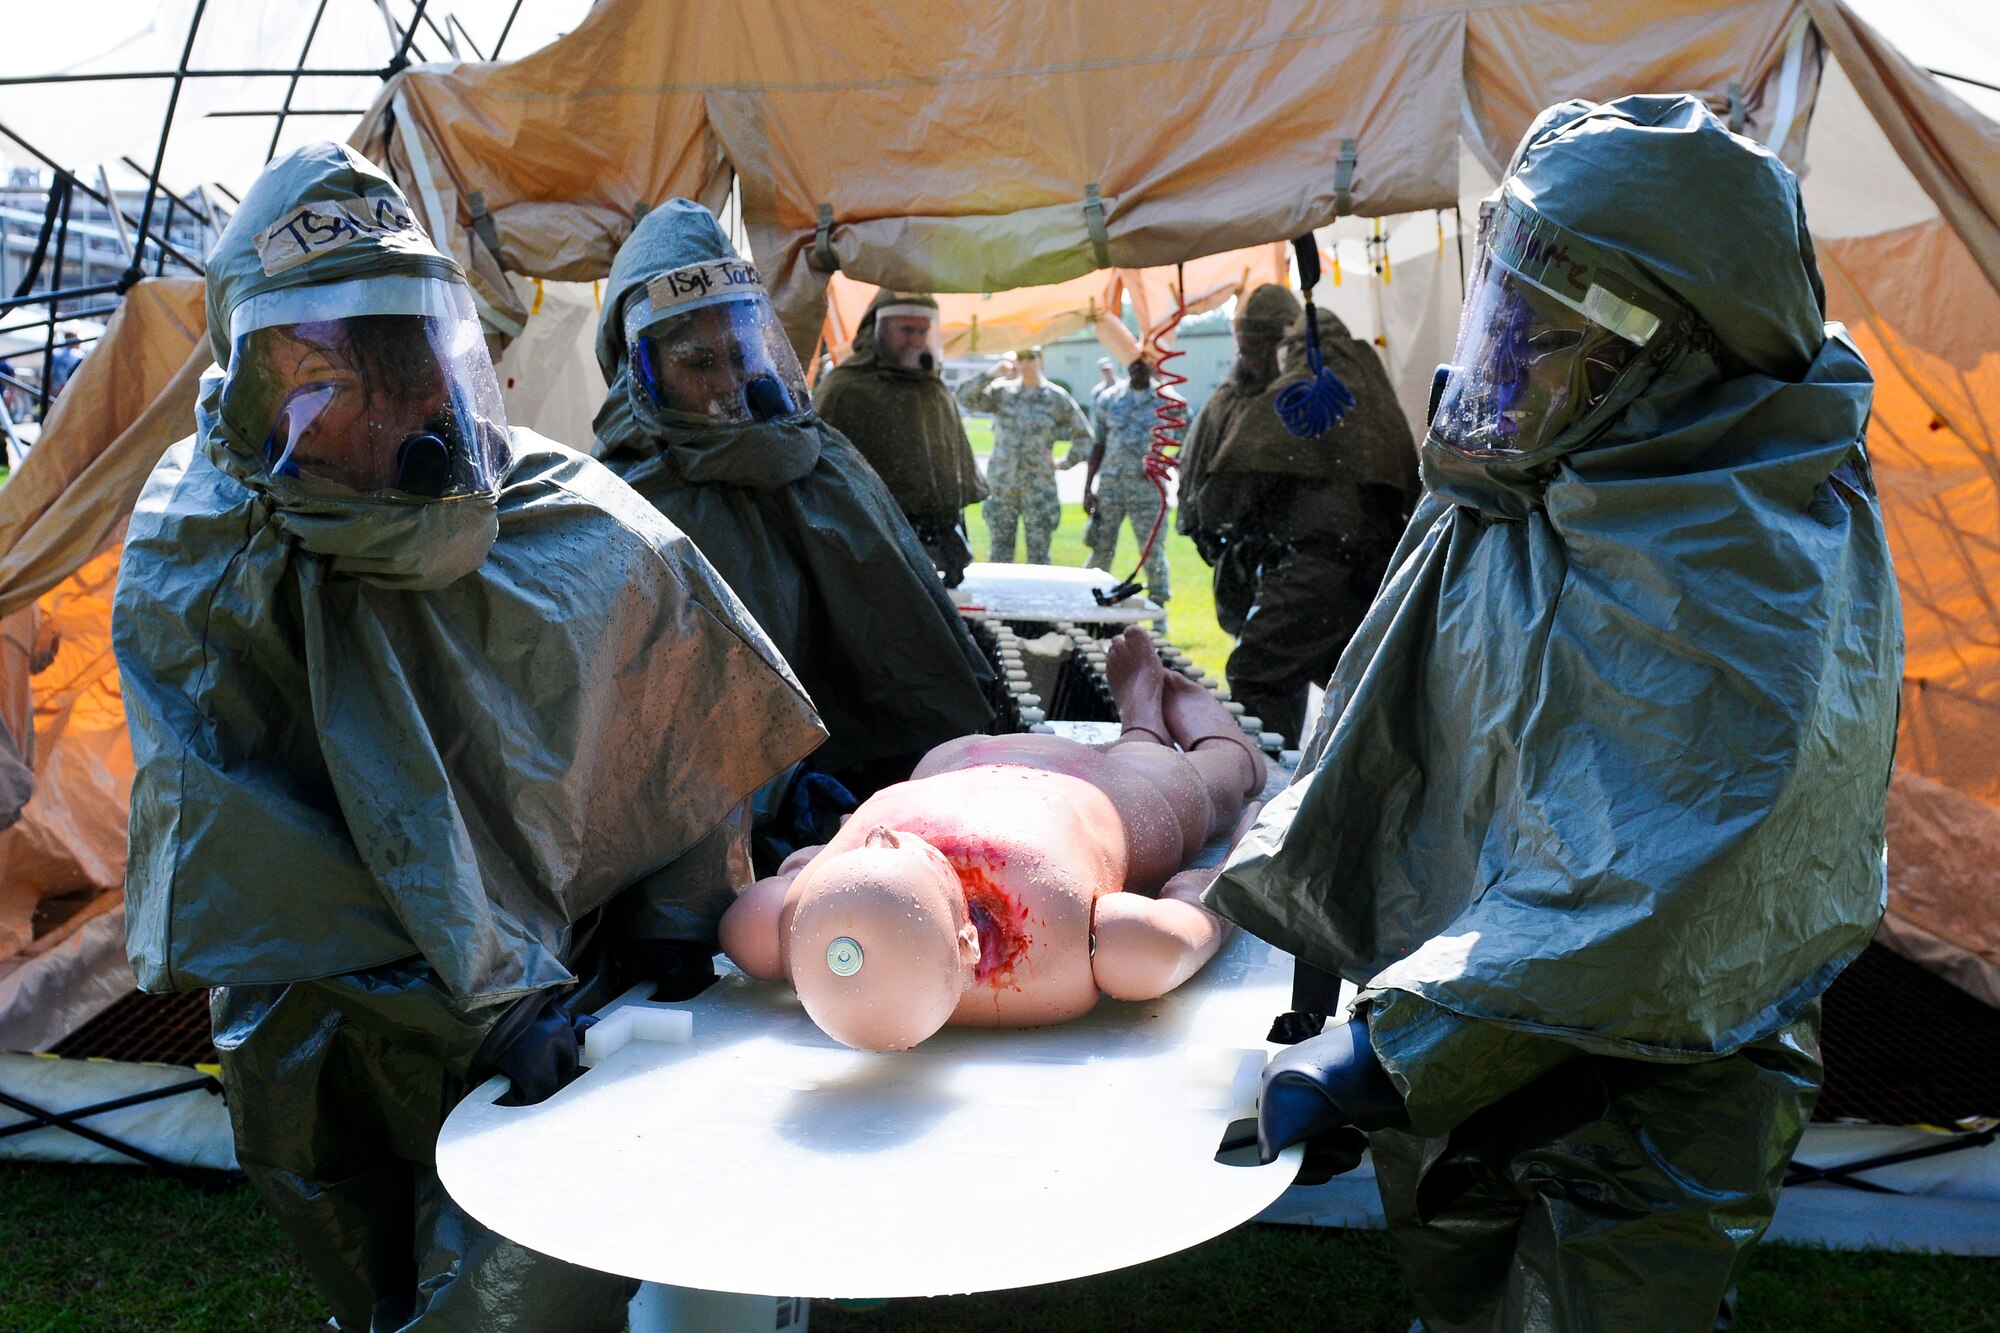 U.S. Air Force patient decontamination team members, assigned to the 169th Fighter Wing, South Carolina Air National Guard, carry a mannequin used to simulate a victim during a chemical spill scenario at a local company in Georgetown, S.C., June 5, 2014.  South Carolina National Guard Soldiers and Airmen are working side-by-side with the S.C. Emergency Management Division and first responders from local emergency agencies, to effectively respond to any hurricane that may threaten the state. The exercise is based on a hurricane post-landfall response between federal, state and local agencies, which includes training in communications, first responder skills, with the focus on how to better protect and assist citizens during emergency situations.  (U.S. Air National Guard photo by Tech. Sgt. Jorge Intriago/Released)
